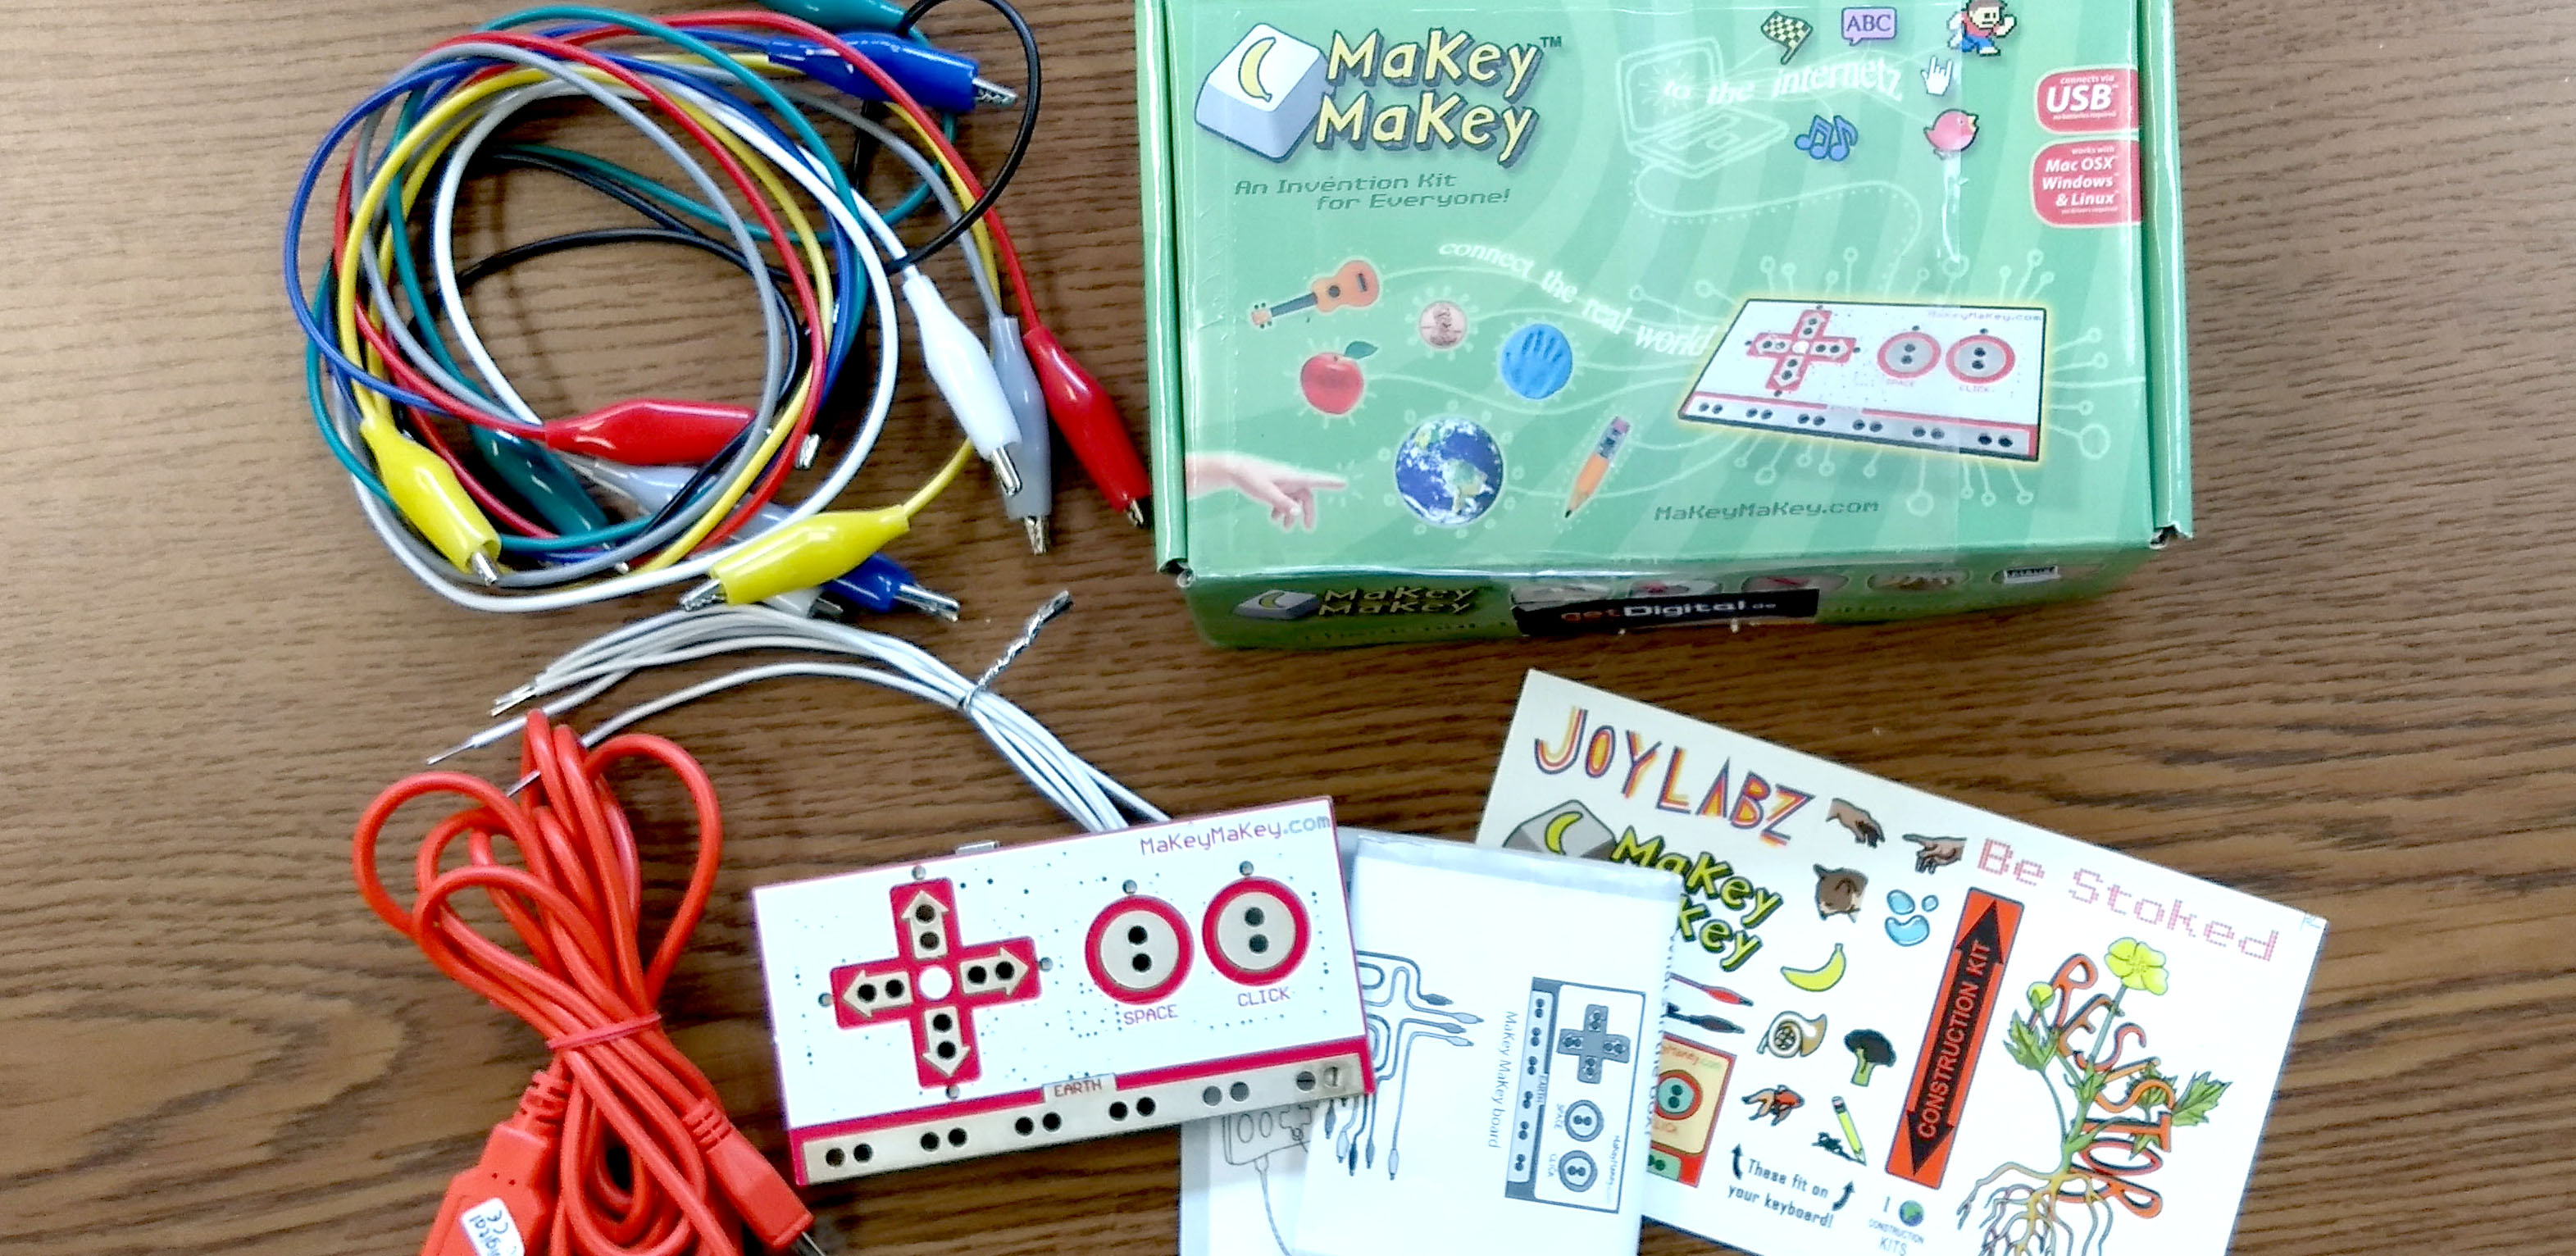 Makey Makey an invention kit for everyone